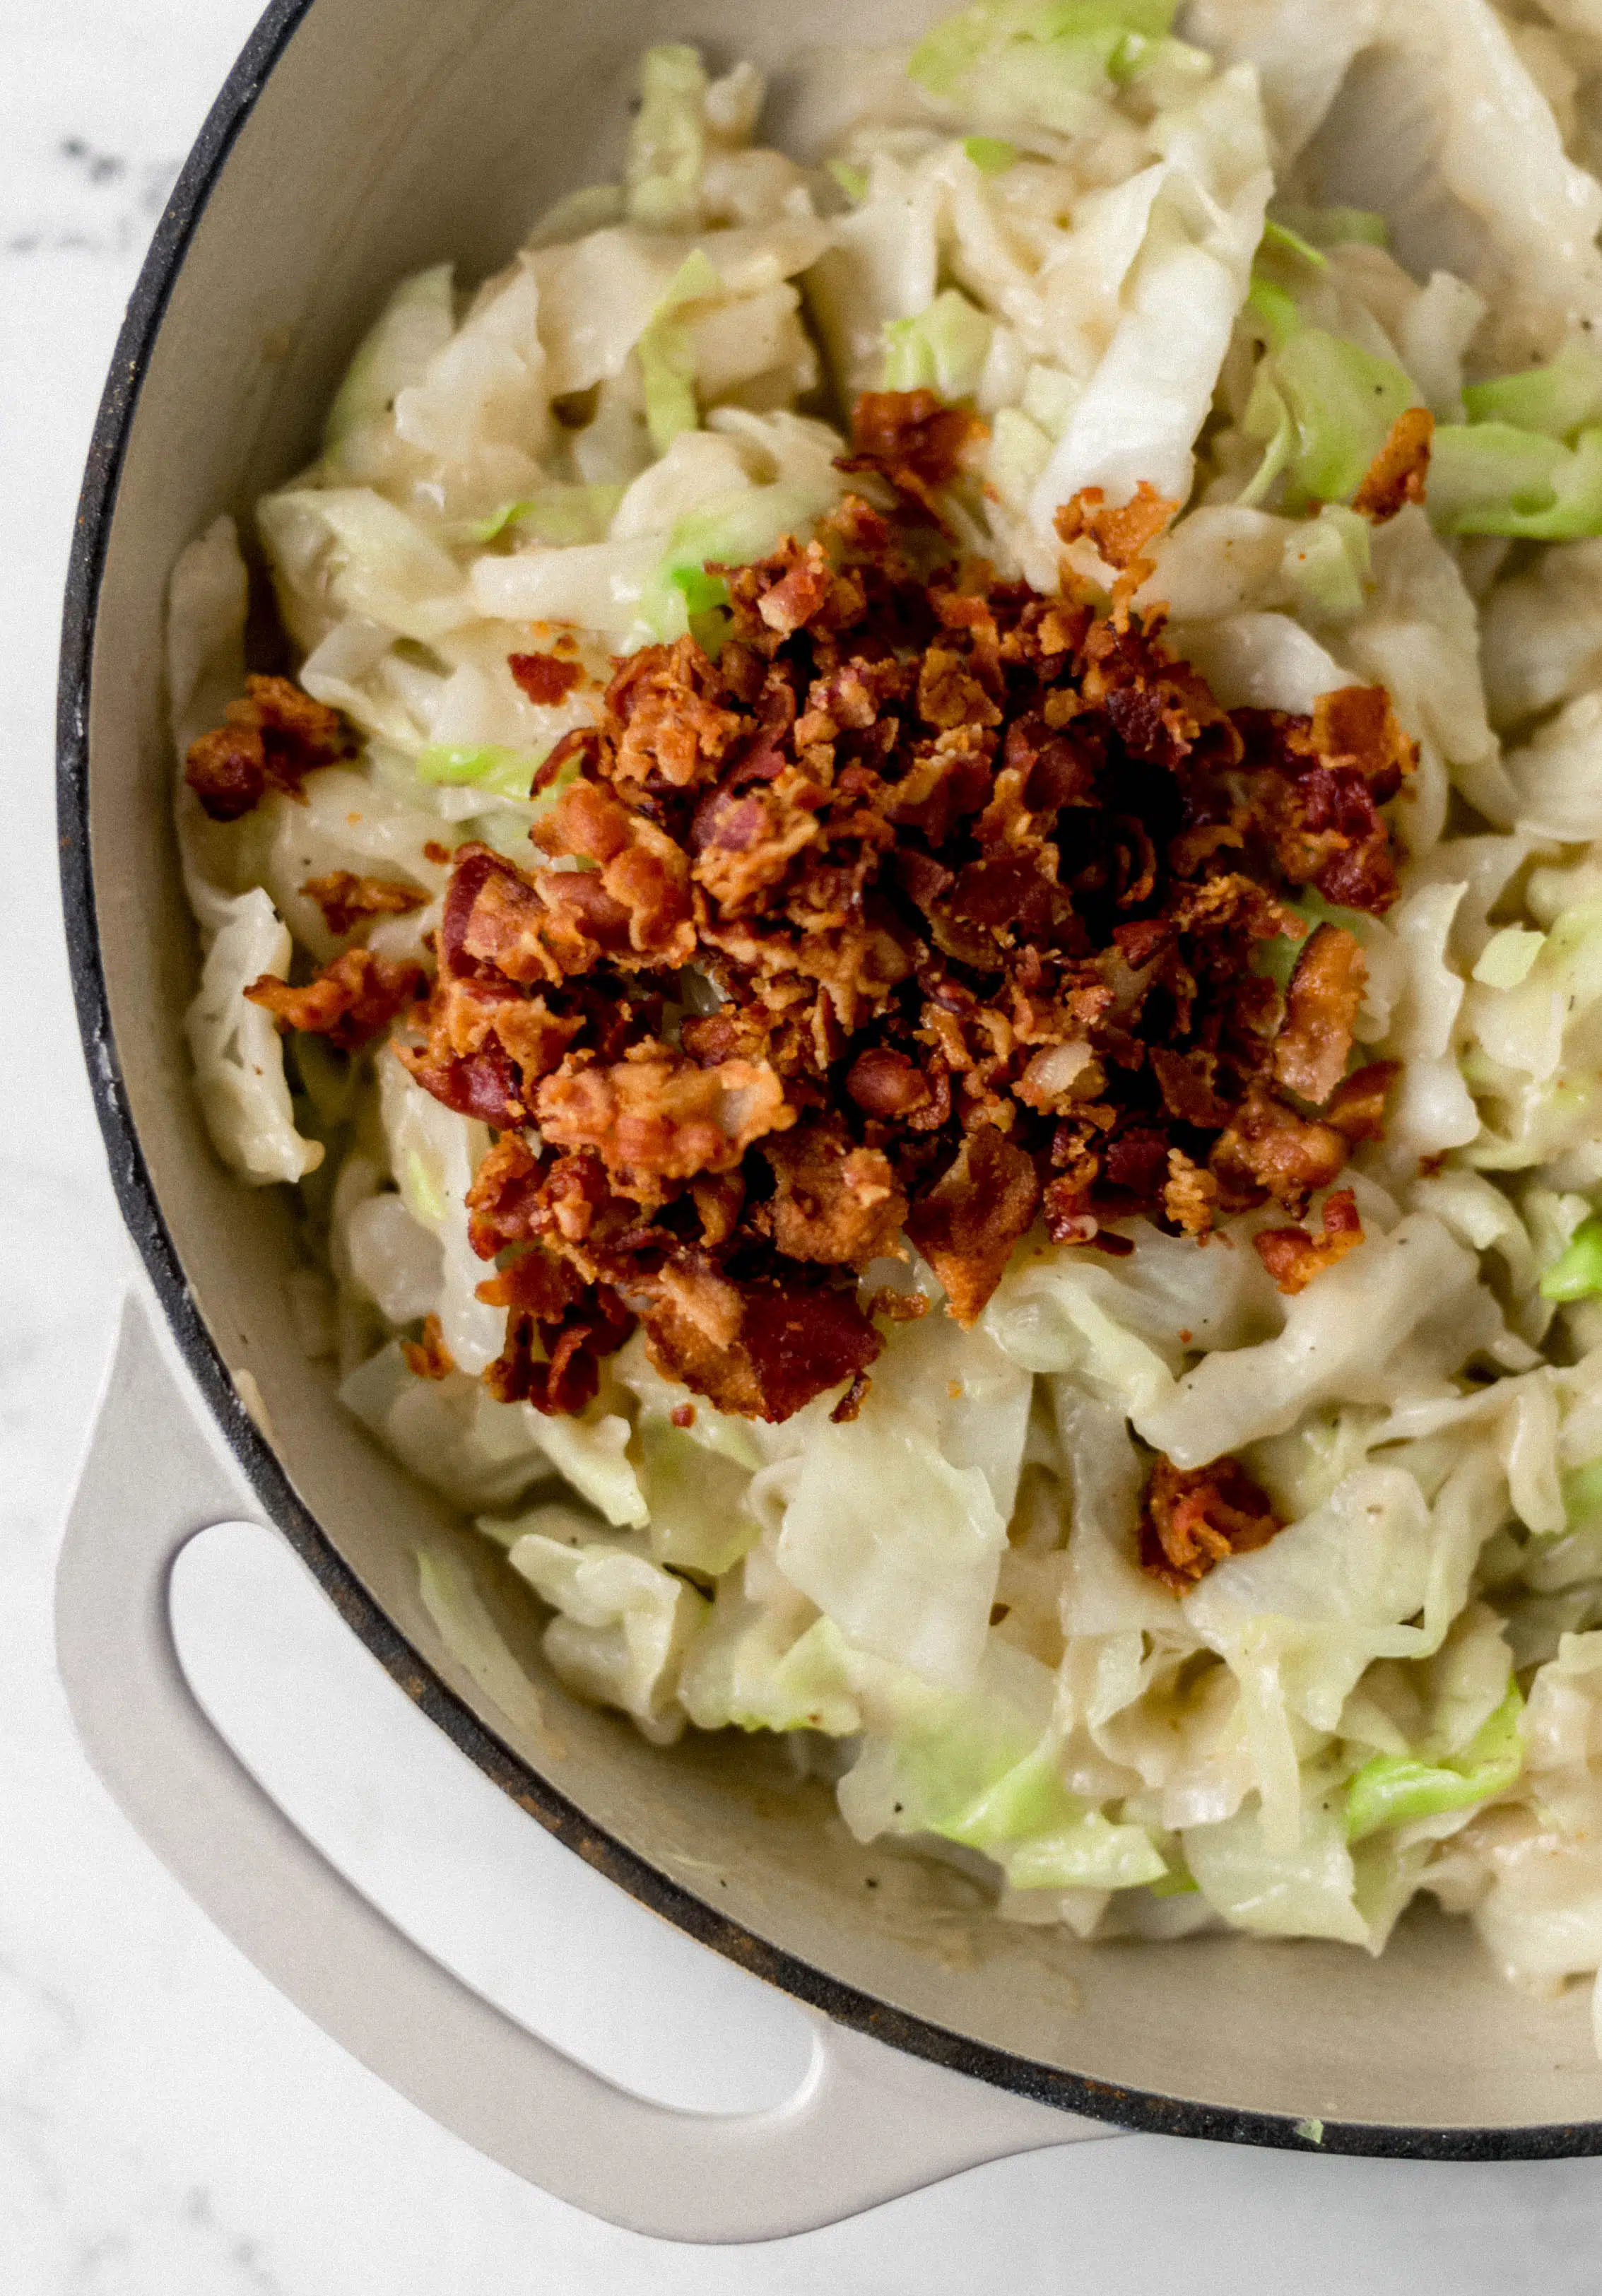 chopped bacon placed on top of cabbage in pan